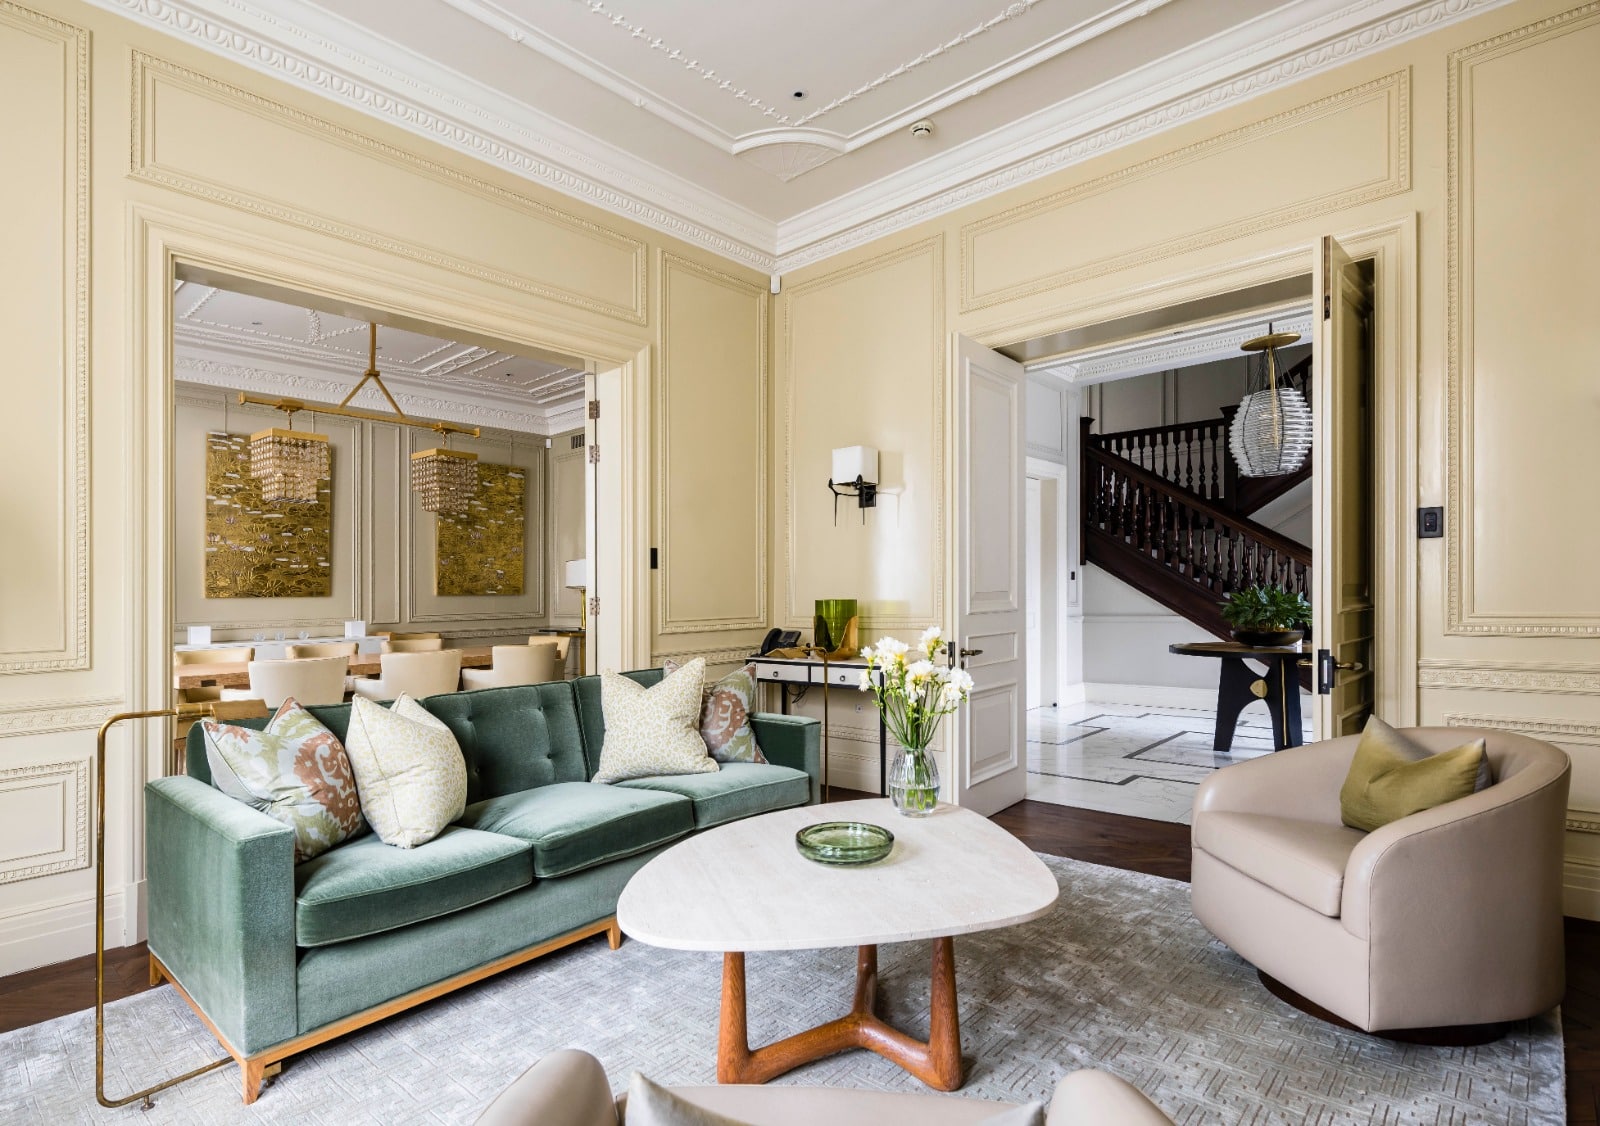 Available For Sale: Lygon Place, Belgravia - £45,000,000